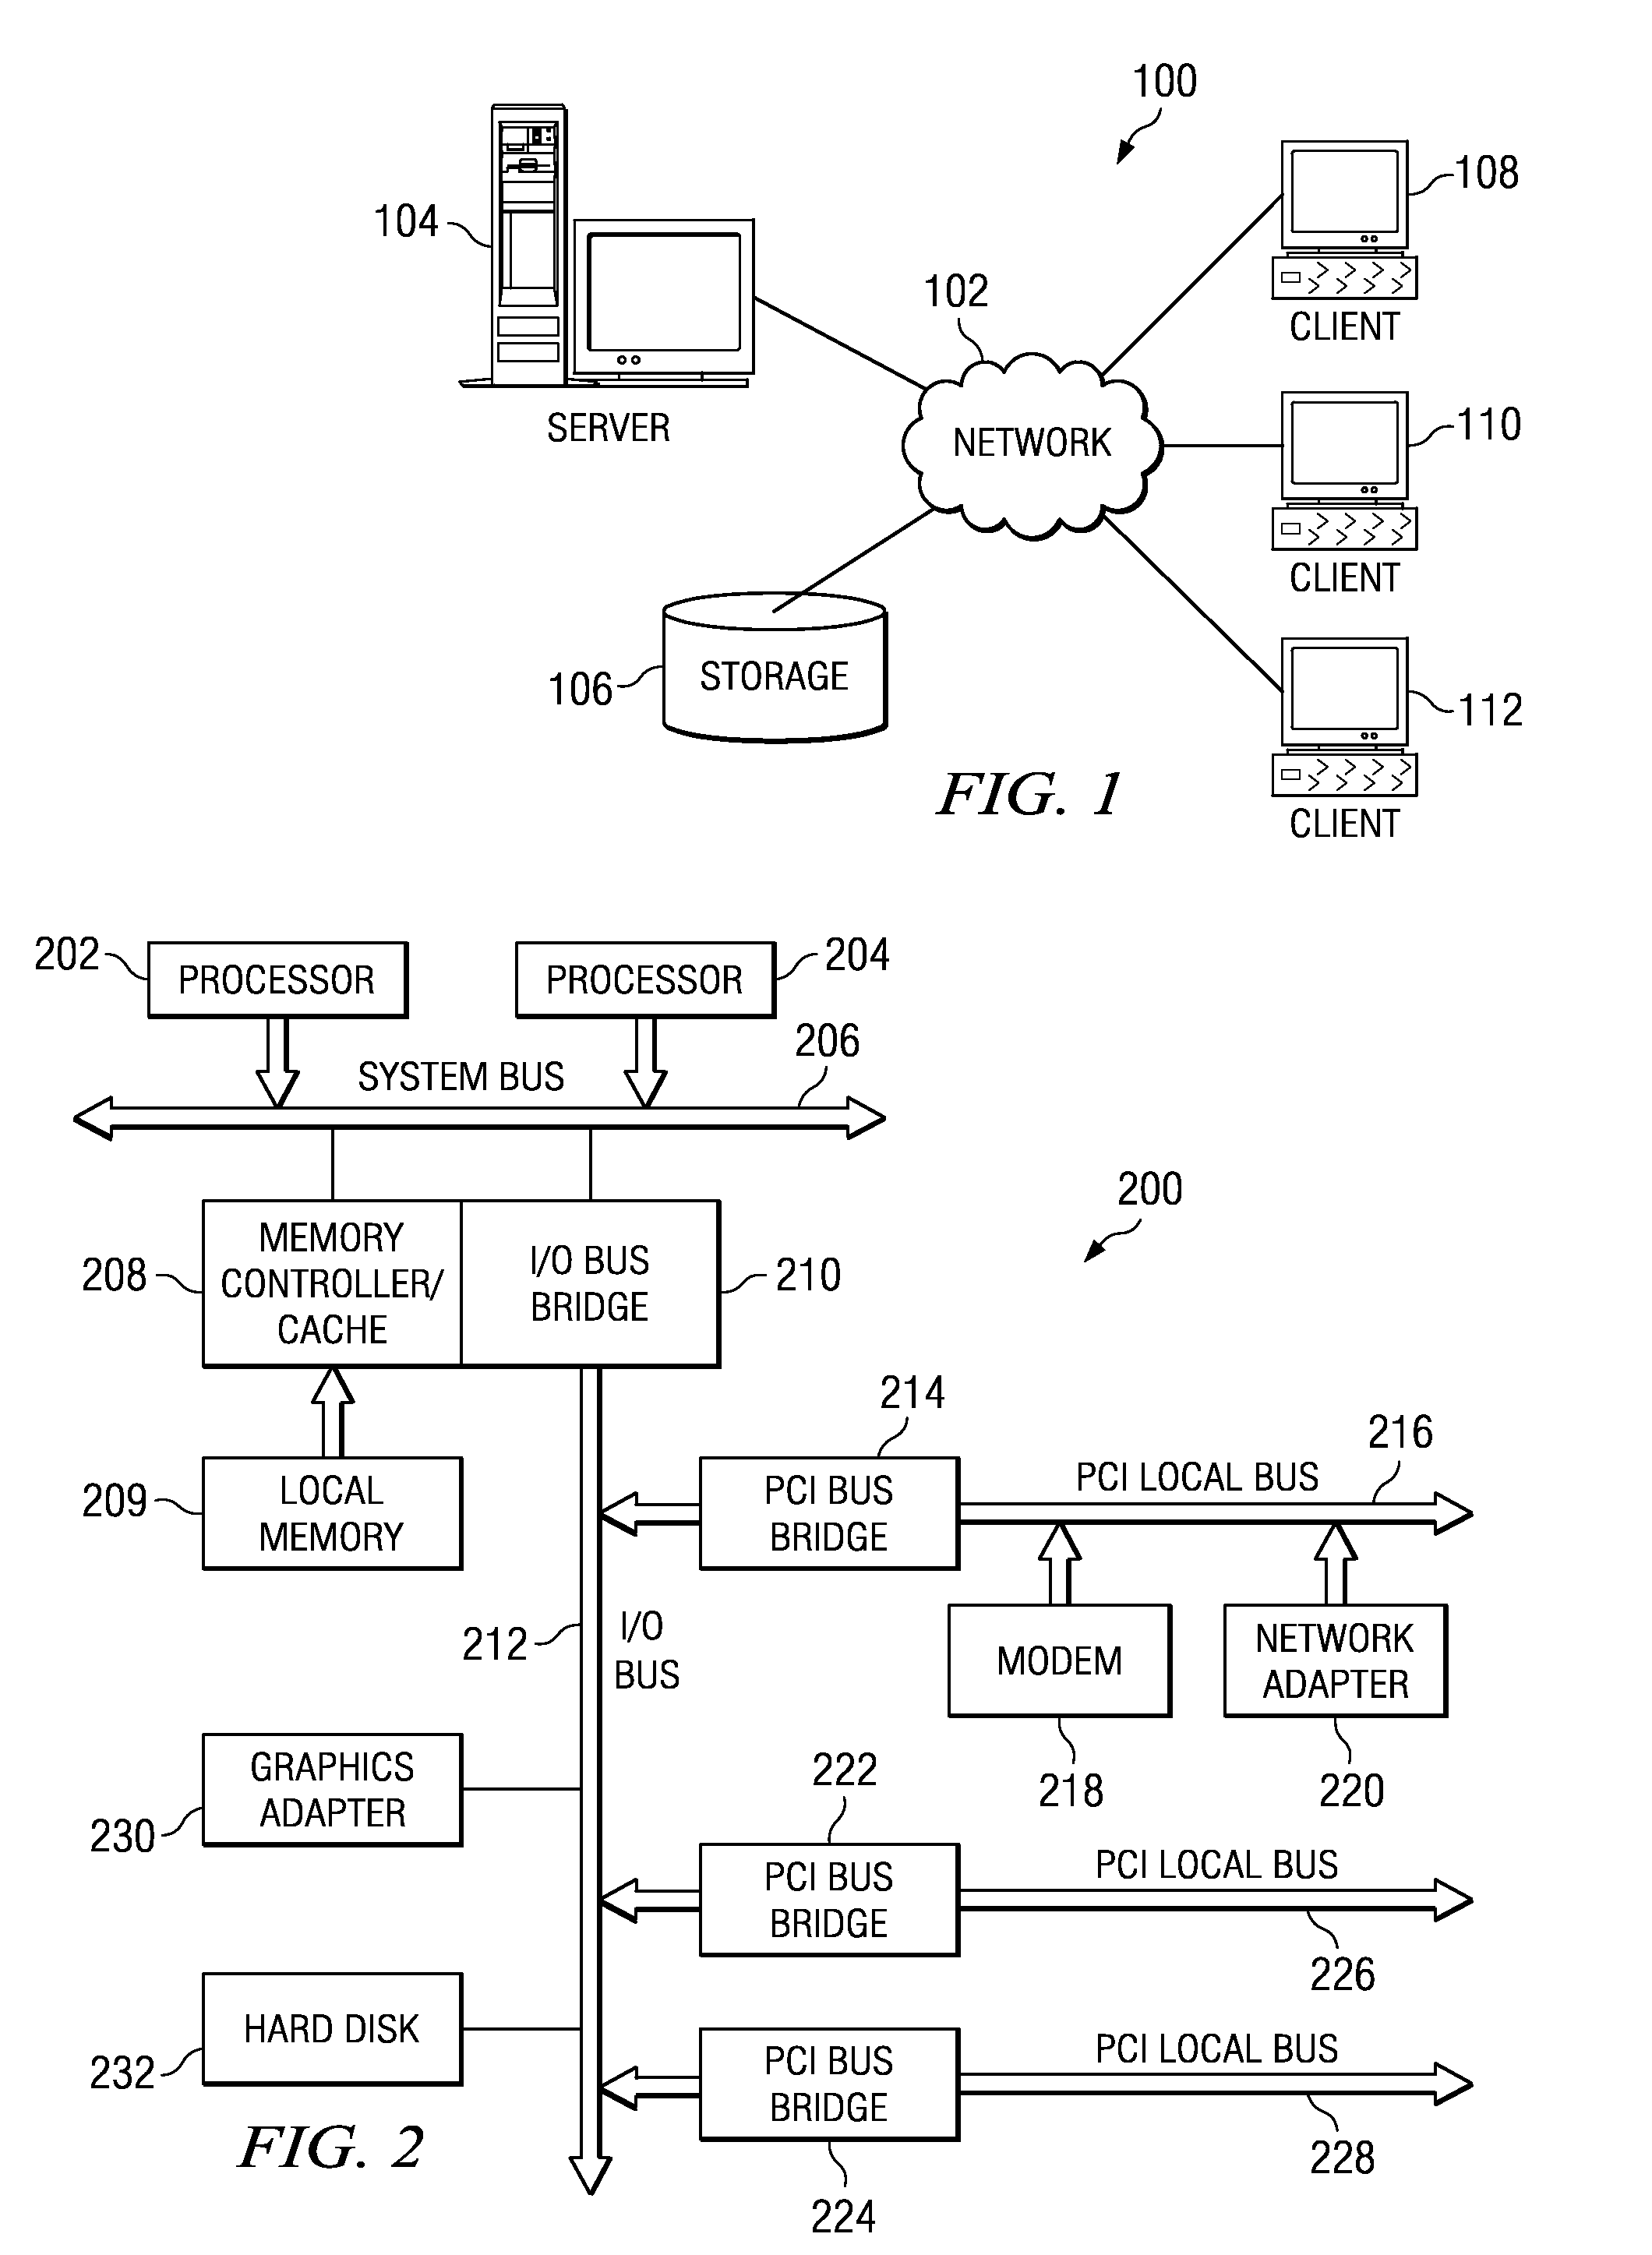 Method and Process to Automatically Perform Test Builds of Translated Files for a Software Product